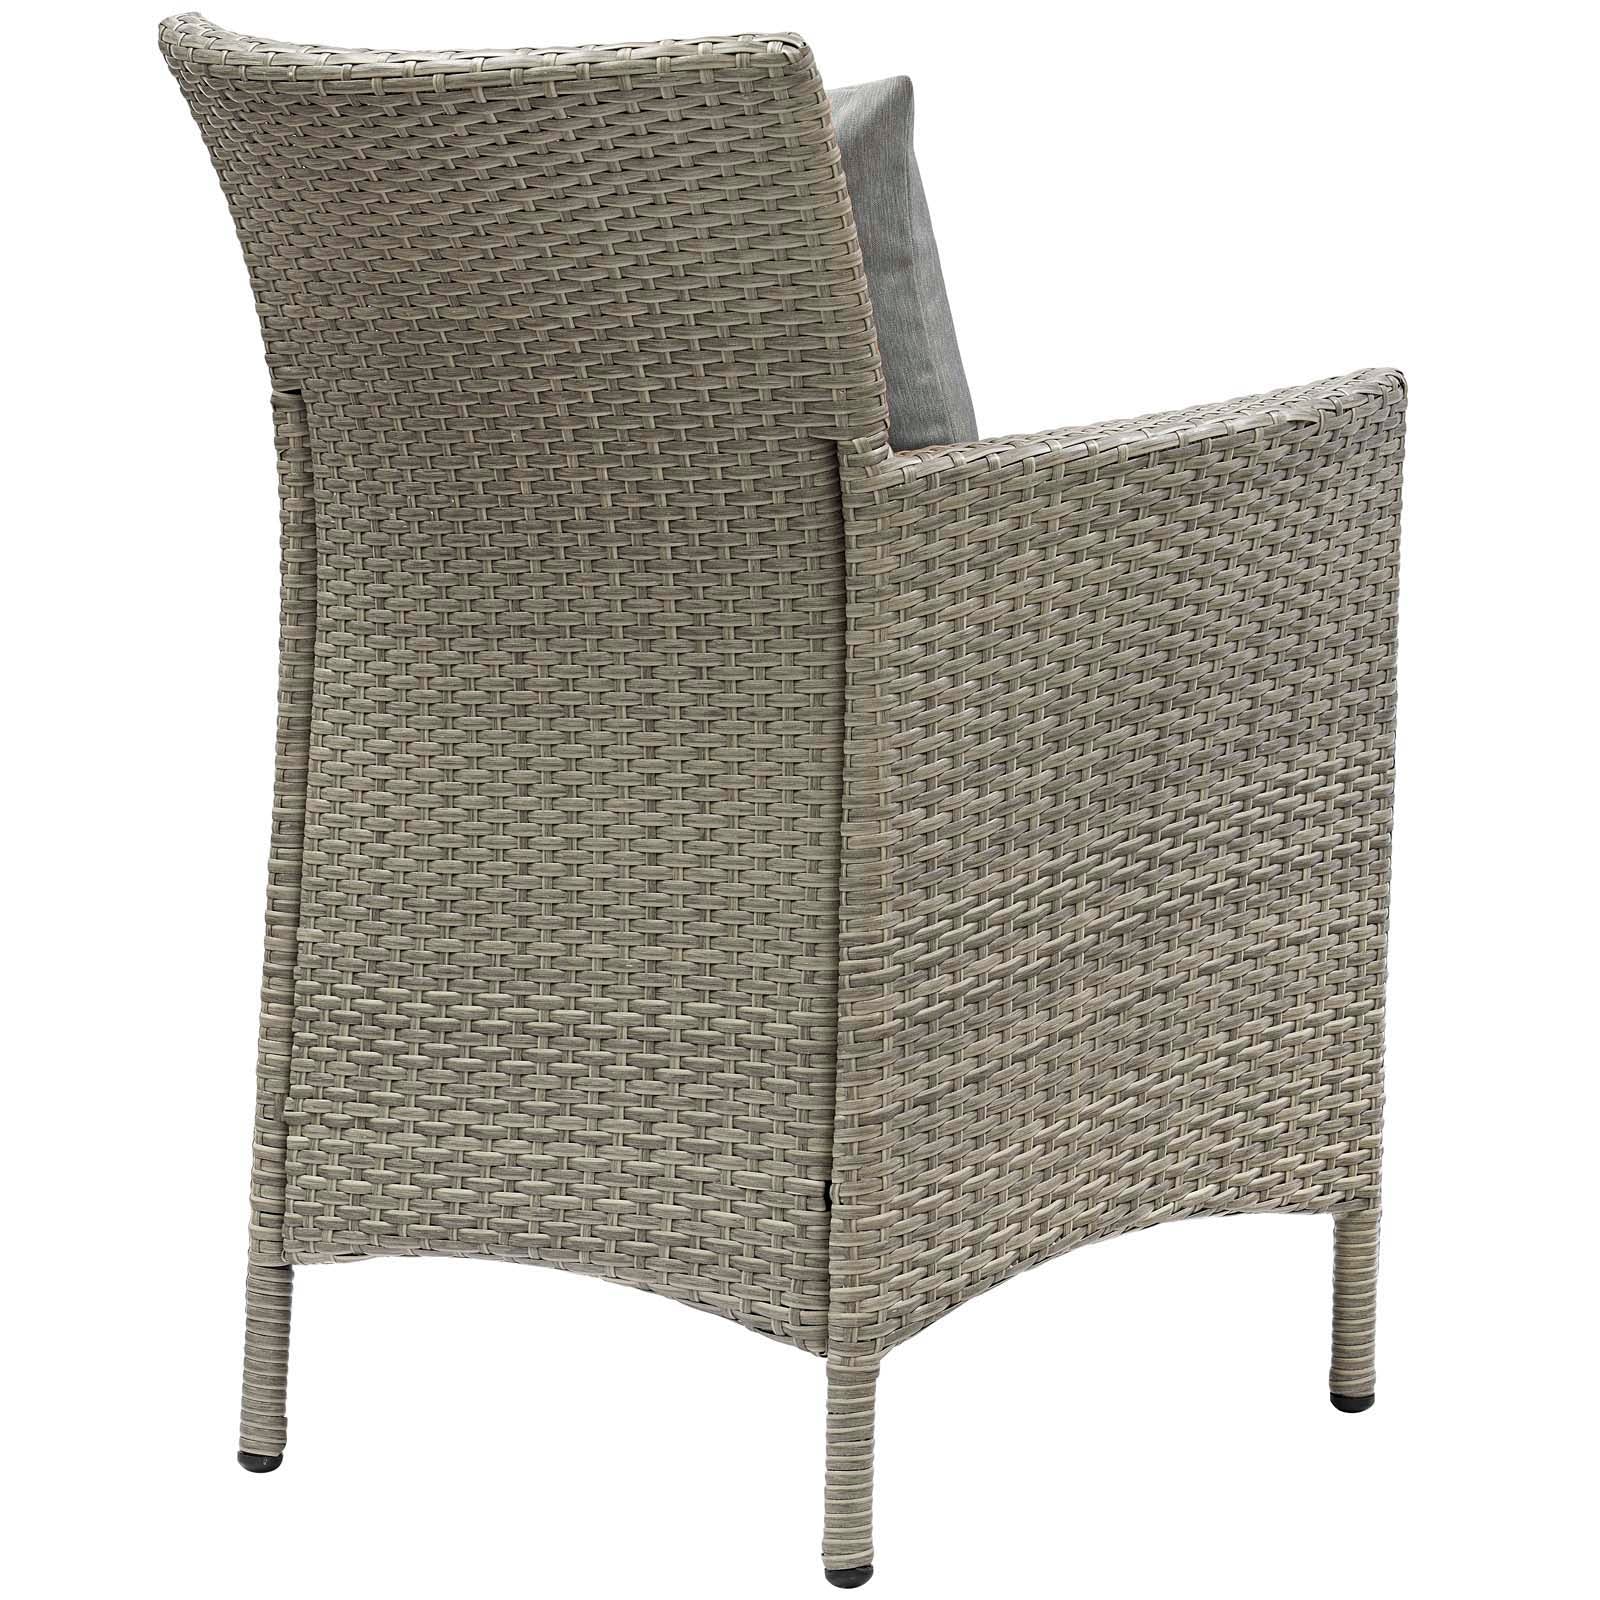 Modway Outdoor Dining Chairs - Conduit Outdoor Patio Wicker Rattan Dining Armchair (Set of 4) Light Gray